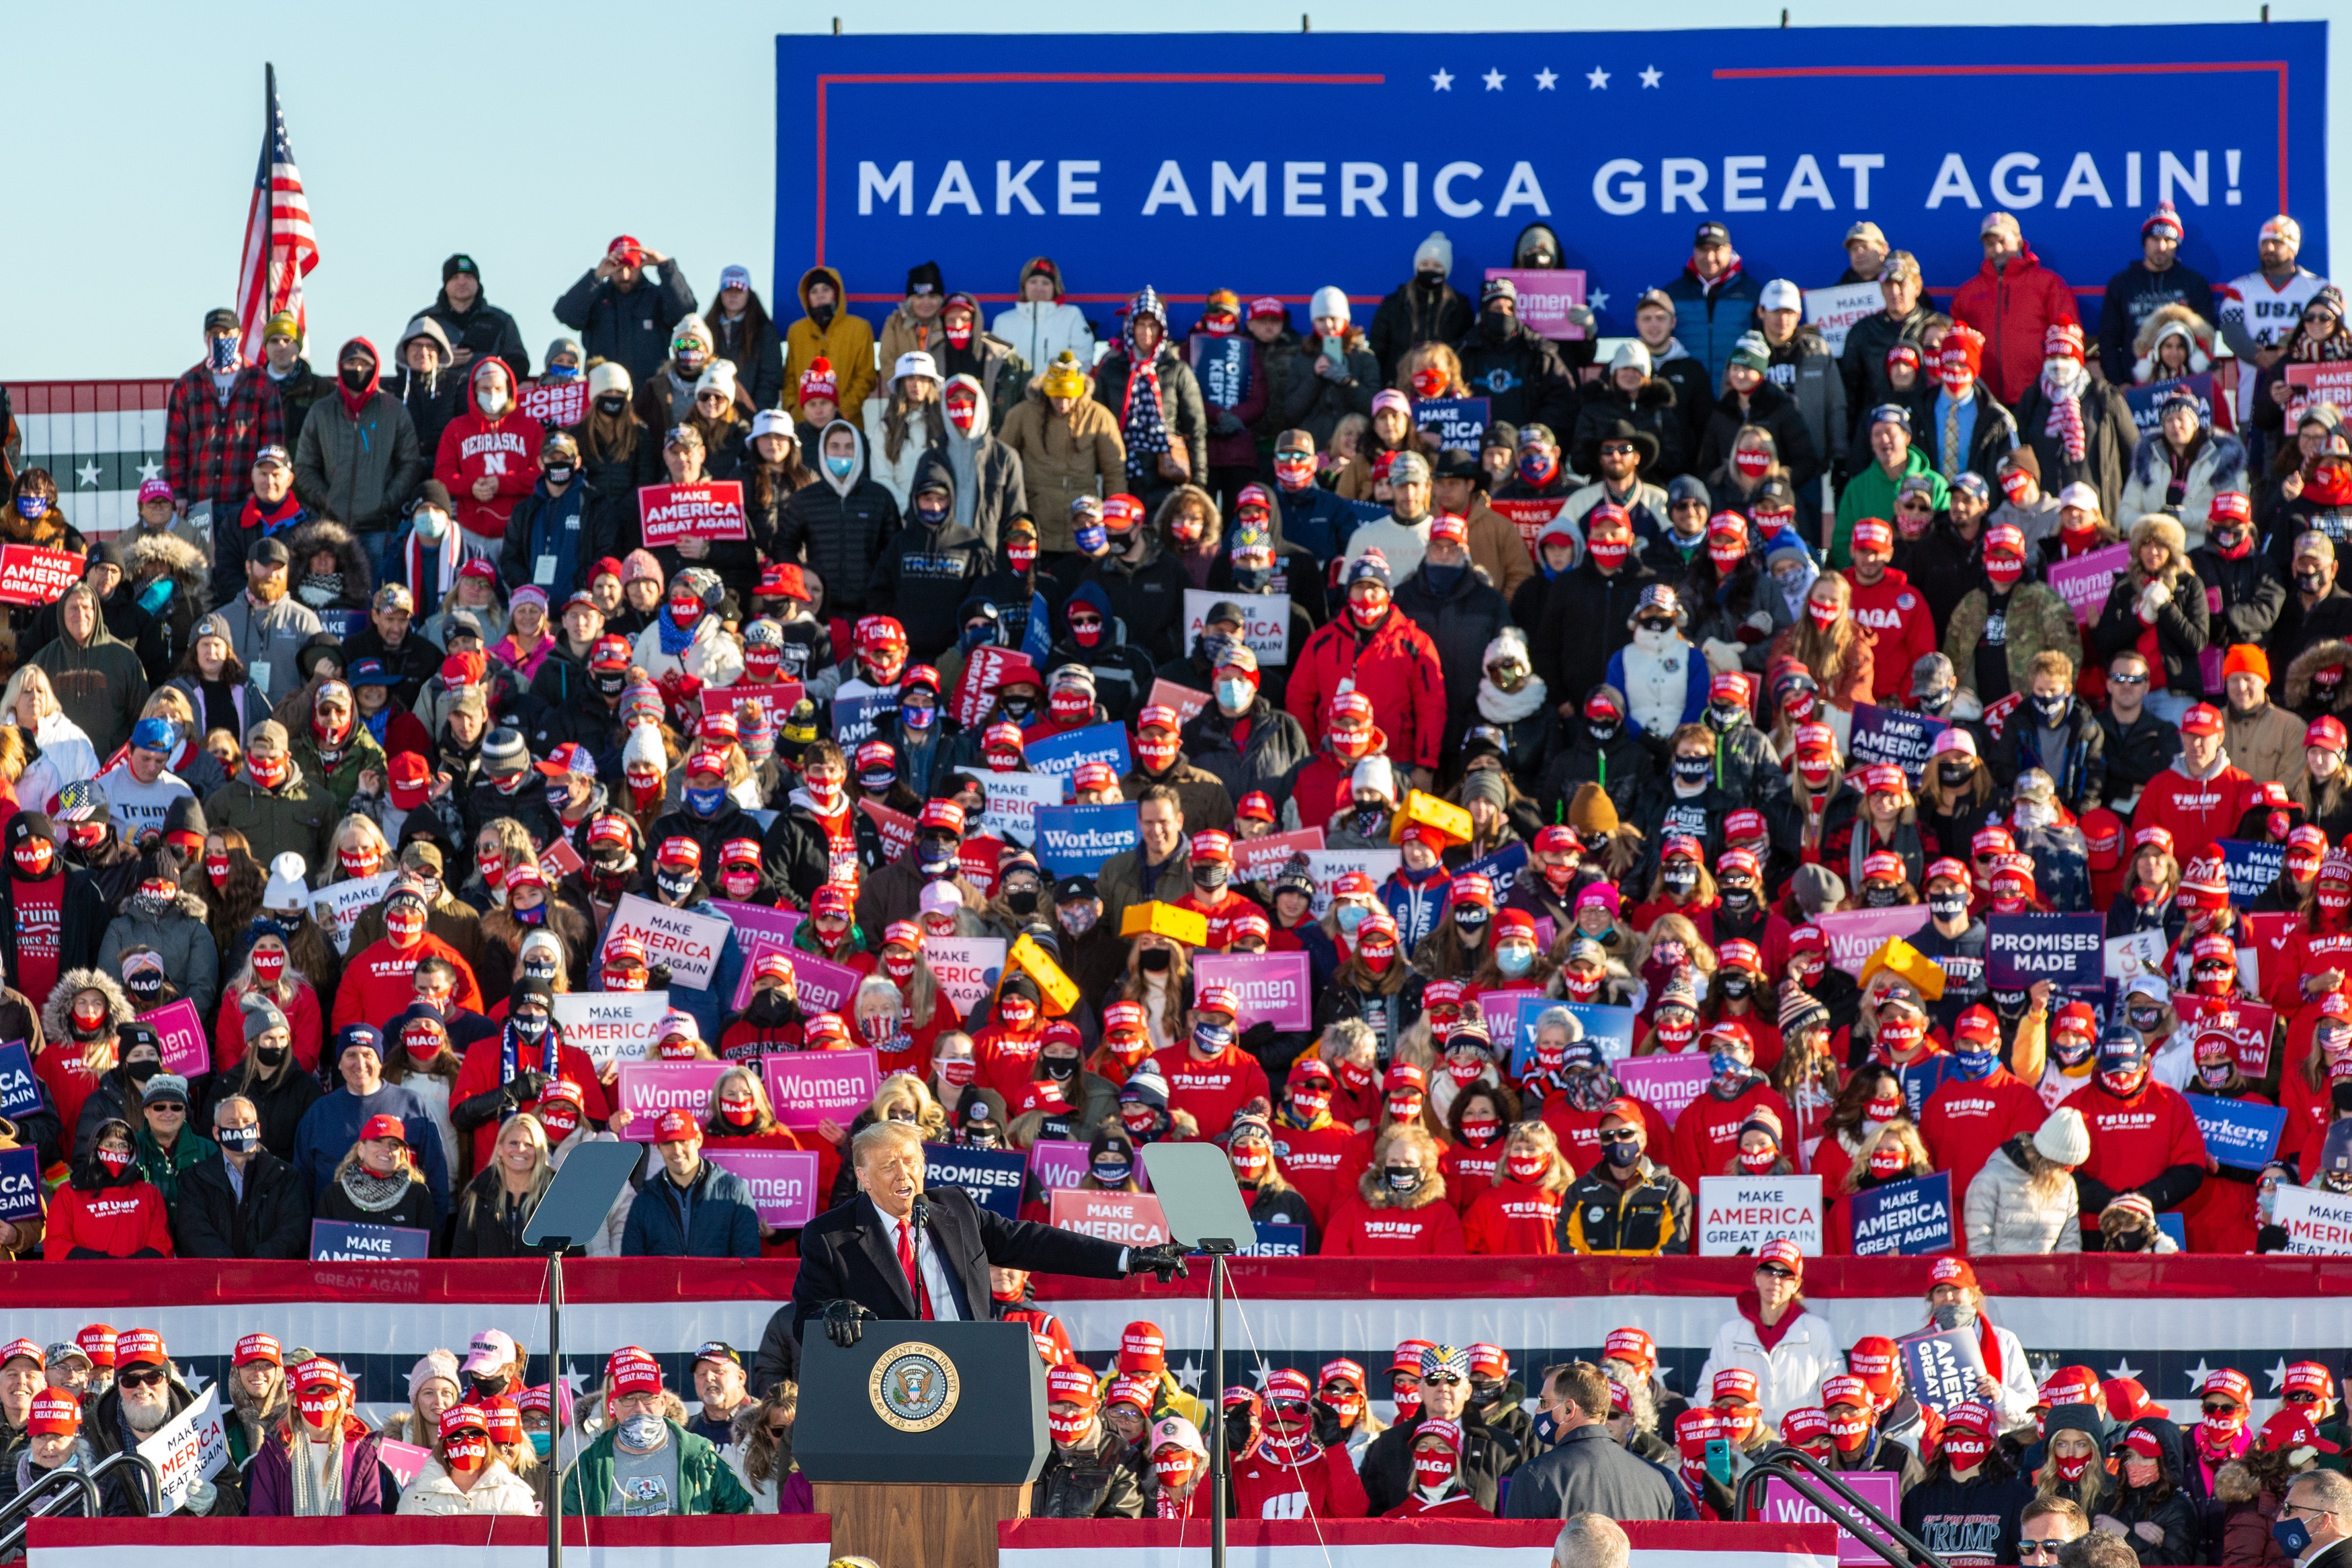 President Donald Trump campaigns at a Make America Great Again rally on 30 October in Green Bay, Wisconsin.